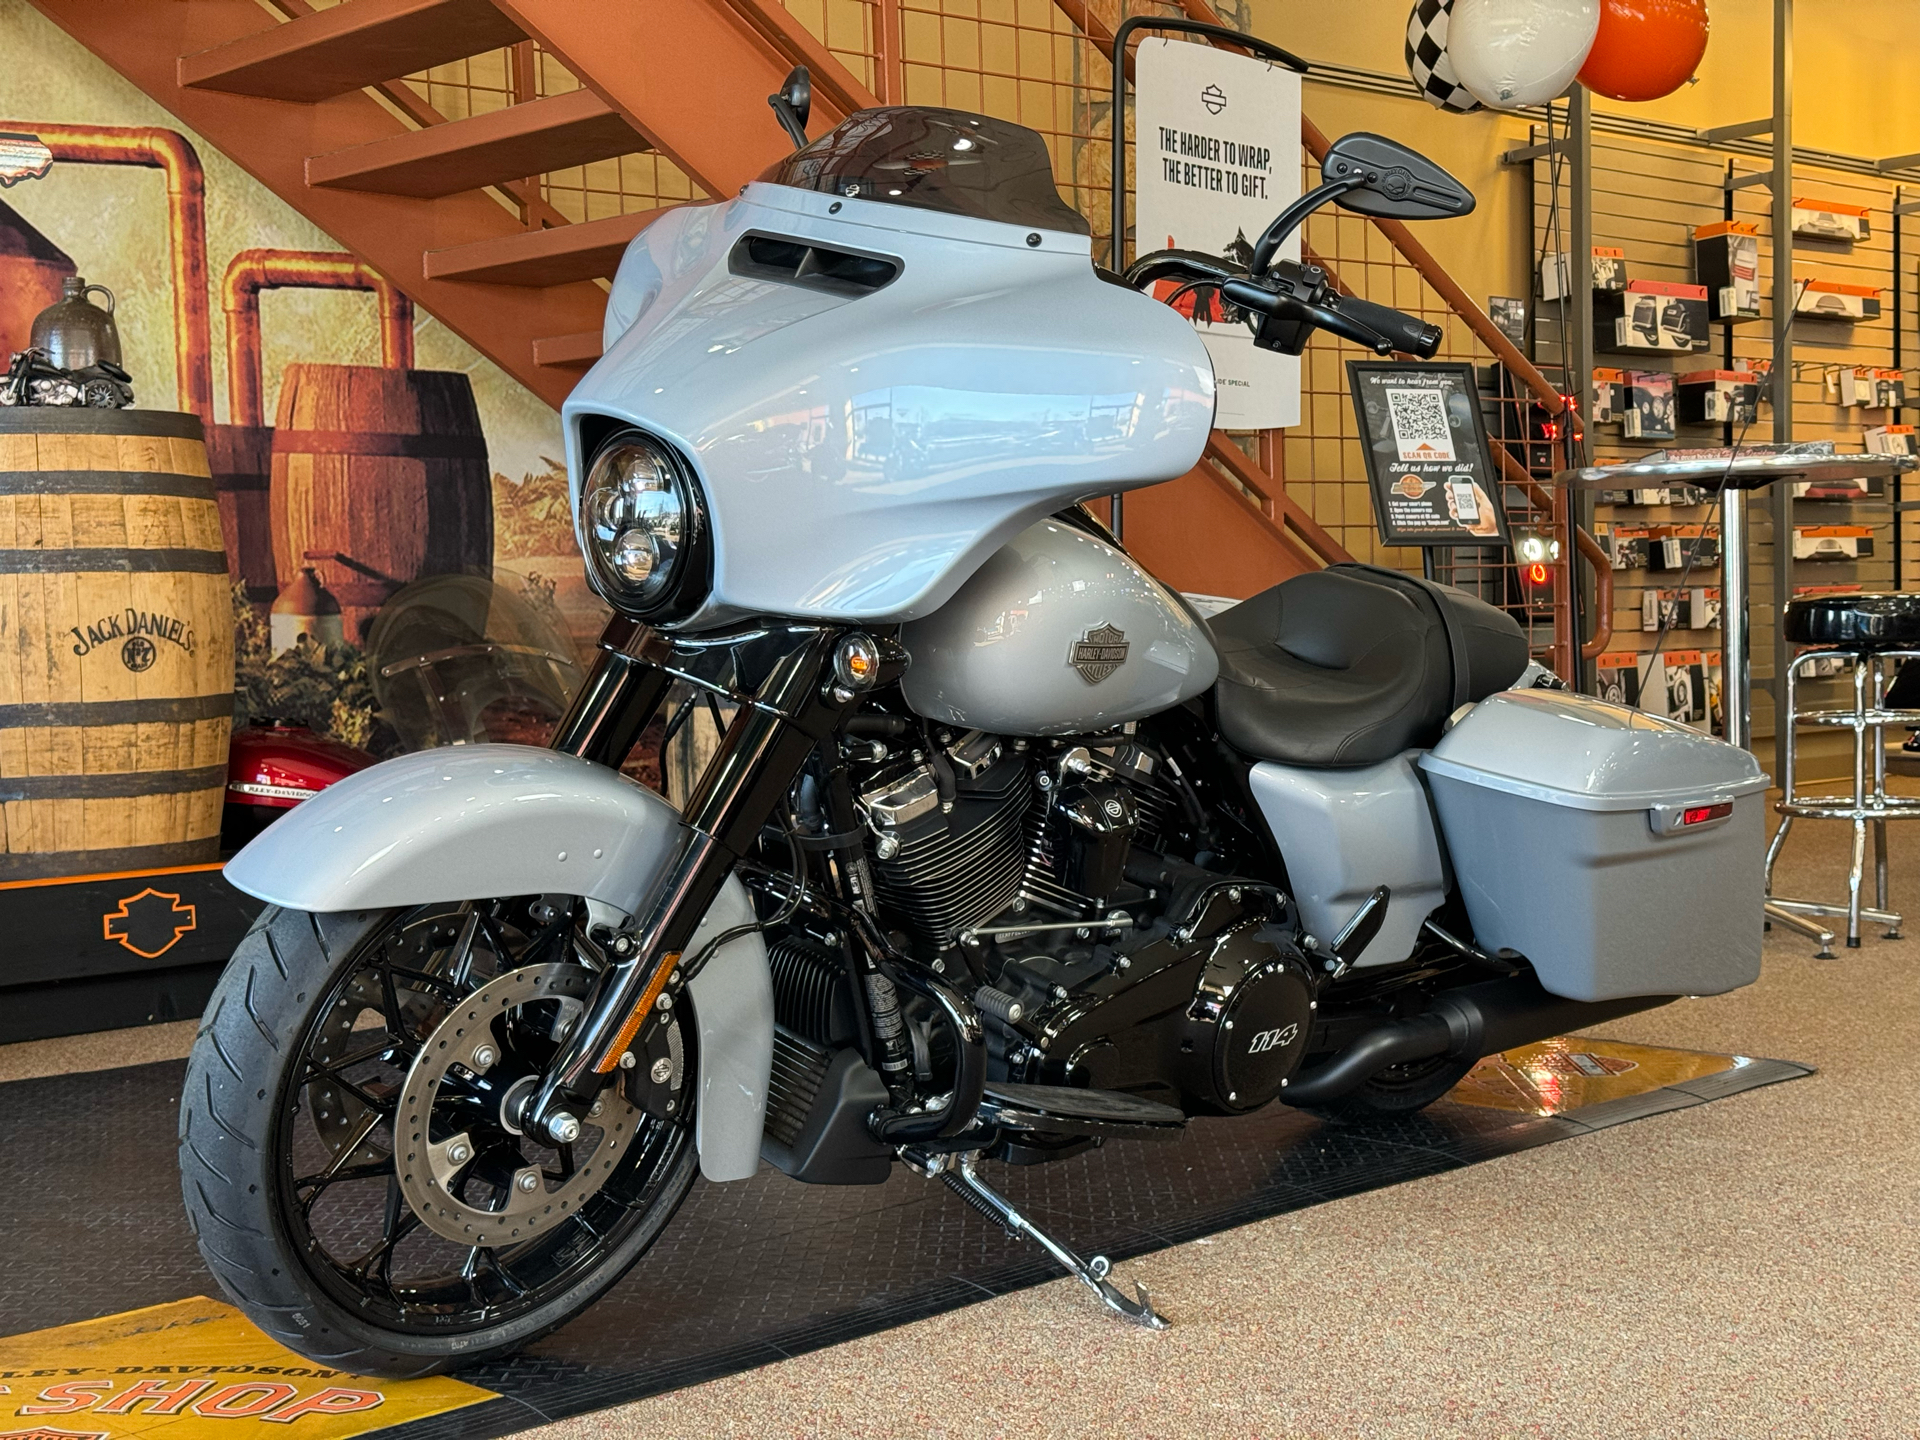 2023 Harley-Davidson Street Glide® Special in Knoxville, Tennessee - Photo 12